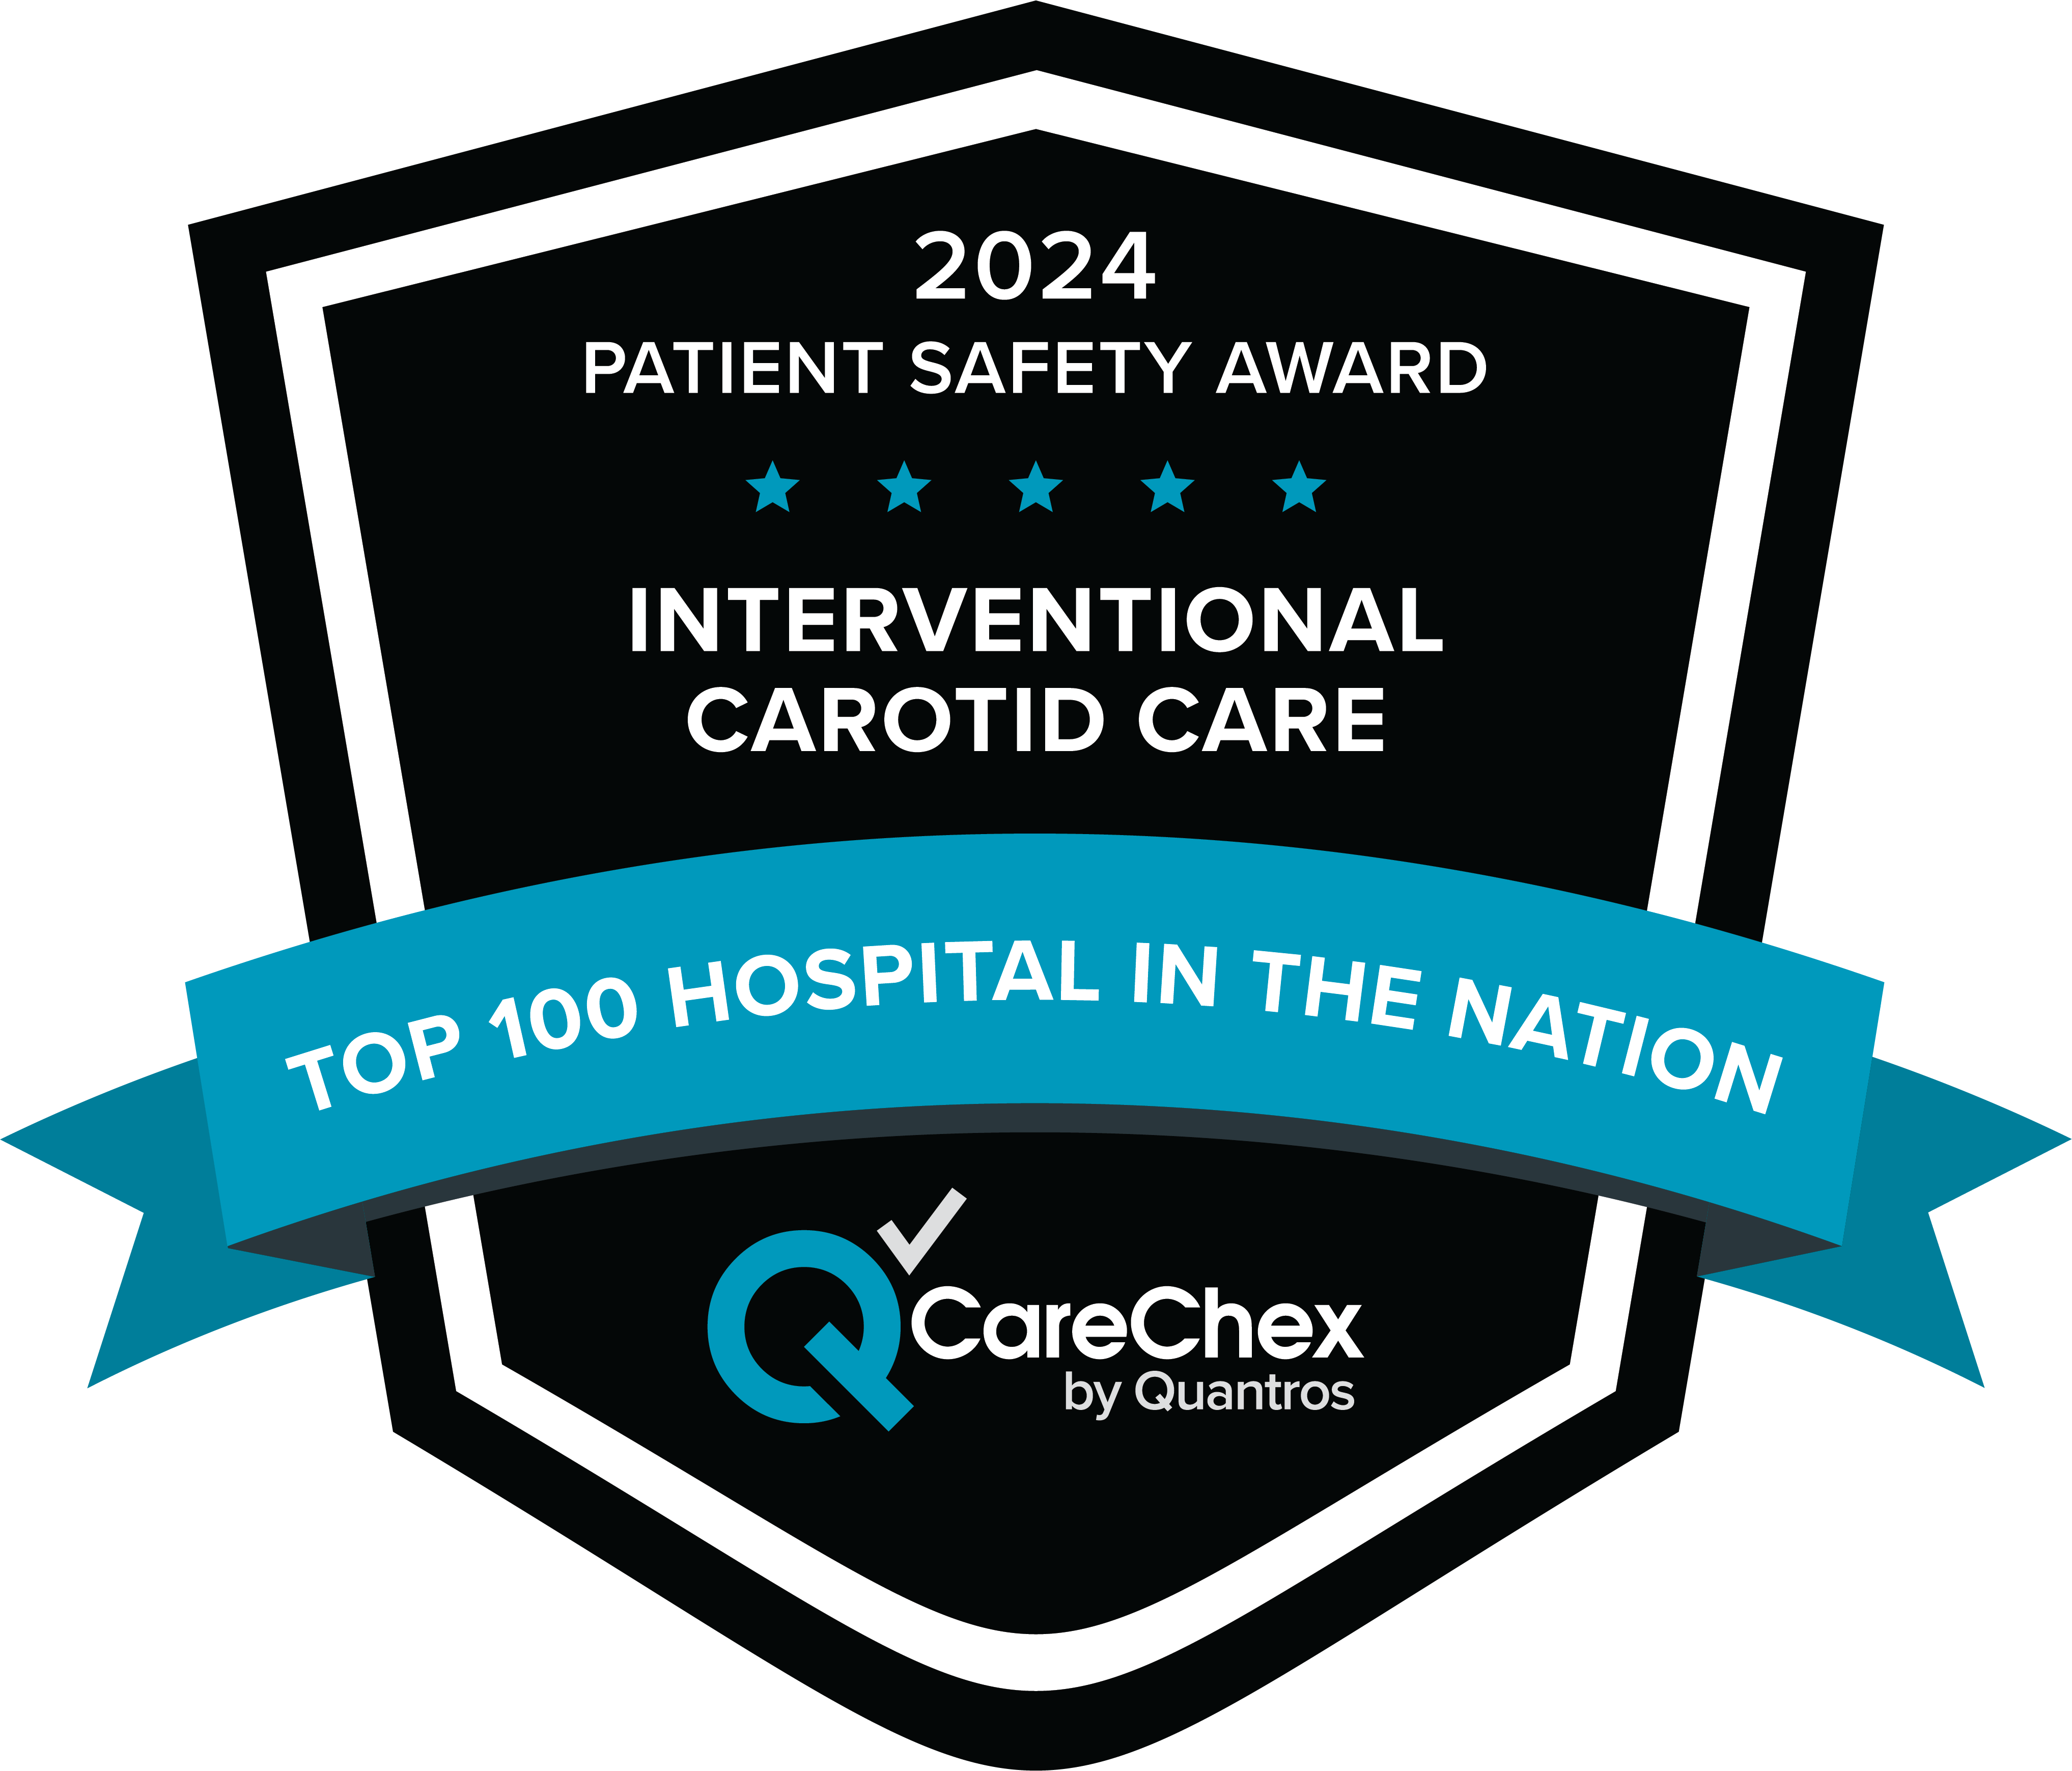 Awards badge for Top 100 Hospital in the Nation for Patient Safety in Interventional Carotid Care – 2024 CareChex by Quantros